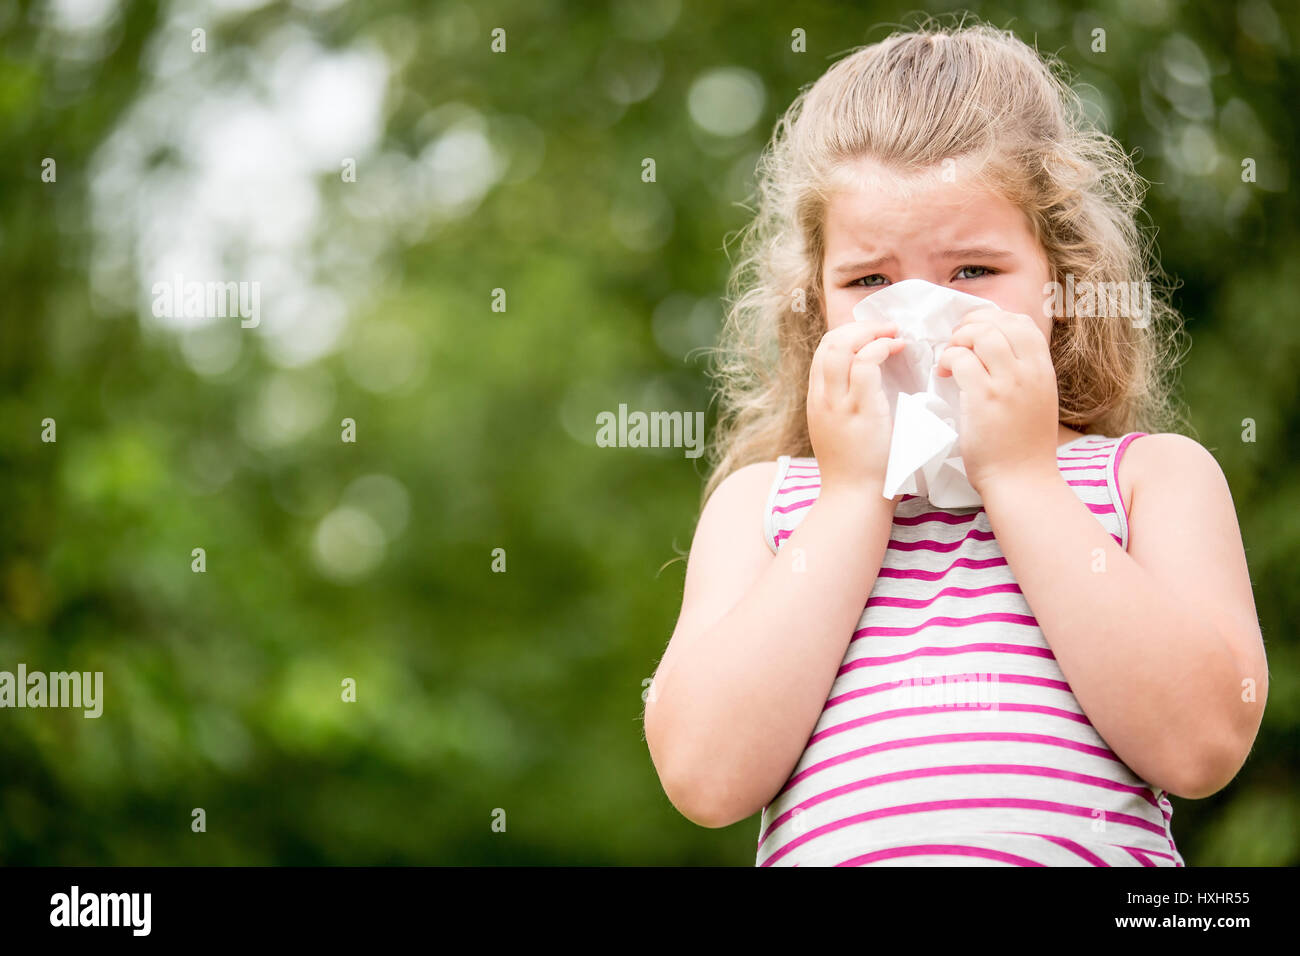 Ill child with a cold or flu sneezes and cleans nose with tissue Stock Photo